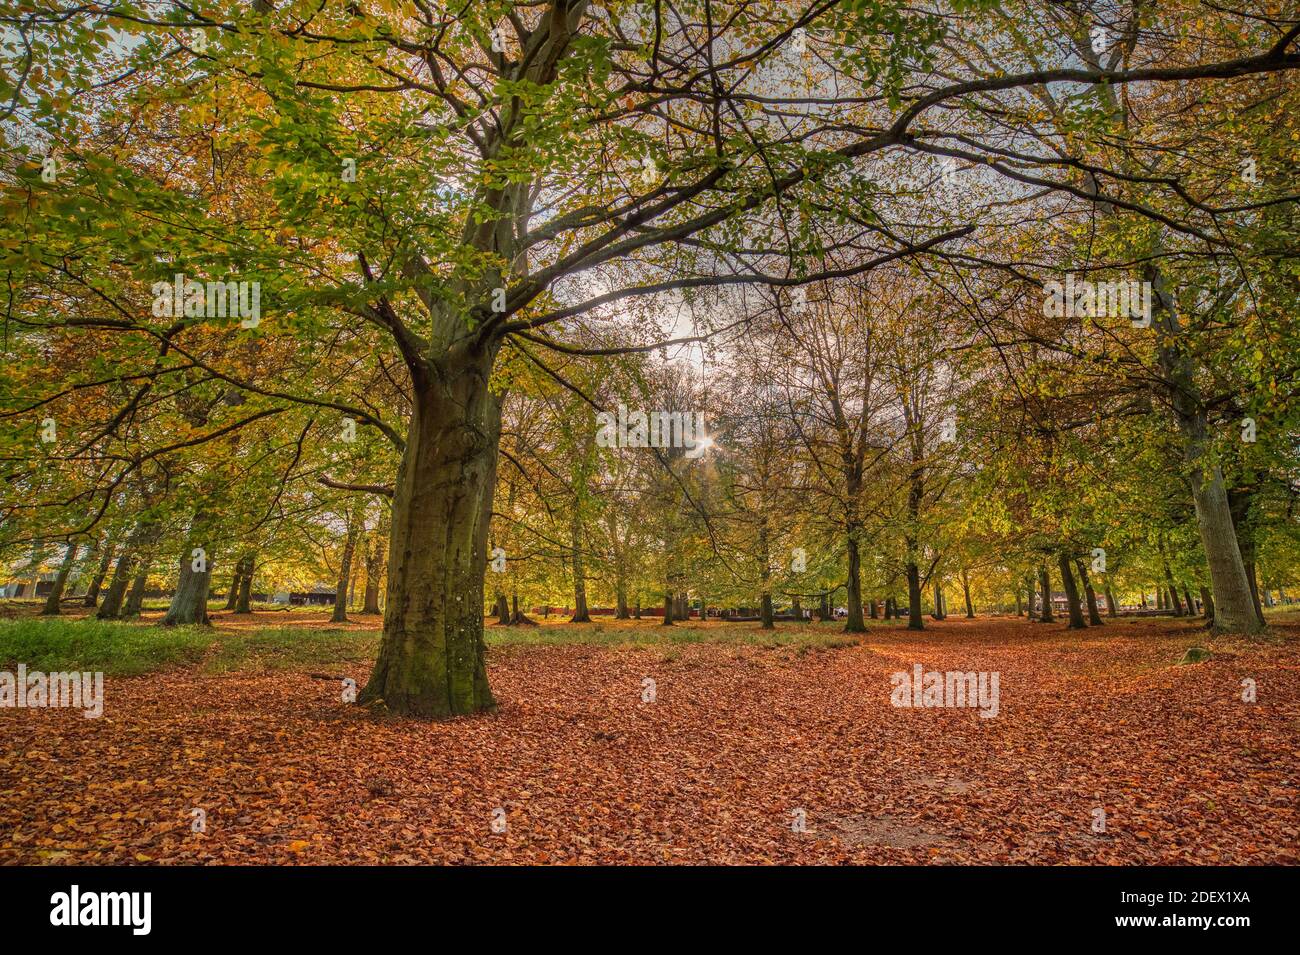 Jaegersborg Dyrehave in Autumn. A colorful foliage dominates the natural, stress free scene in a forest with the sunbeams peeping through the leaves Stock Photo